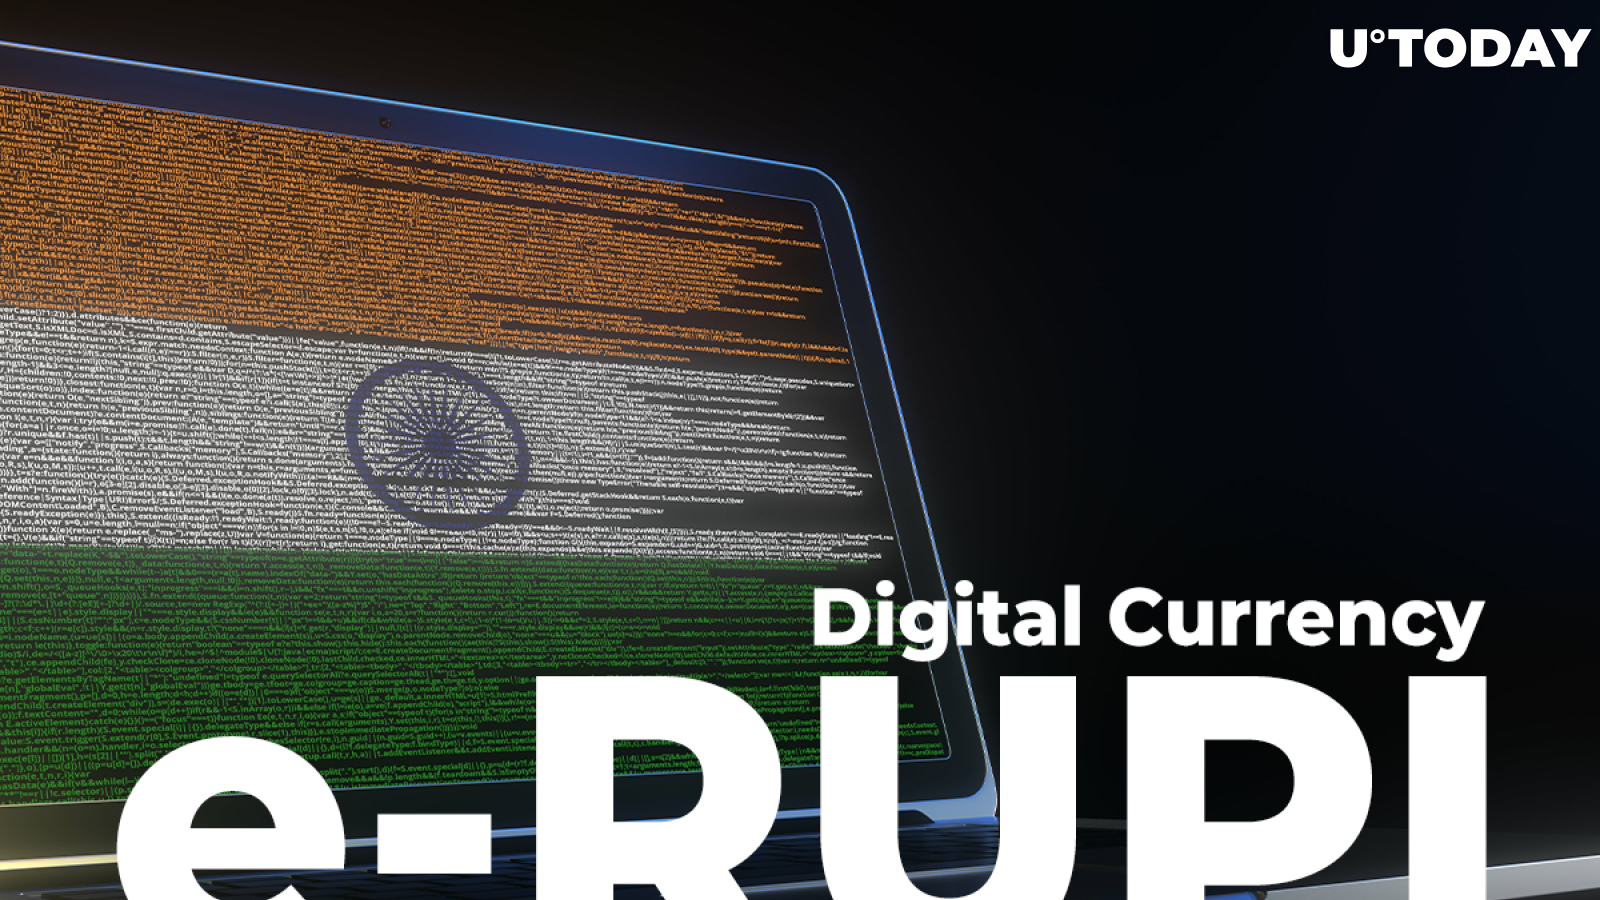 India Launches Country's First Digital Currency, e-RUPI, But Does It Have Anything to Do With Blockchain?